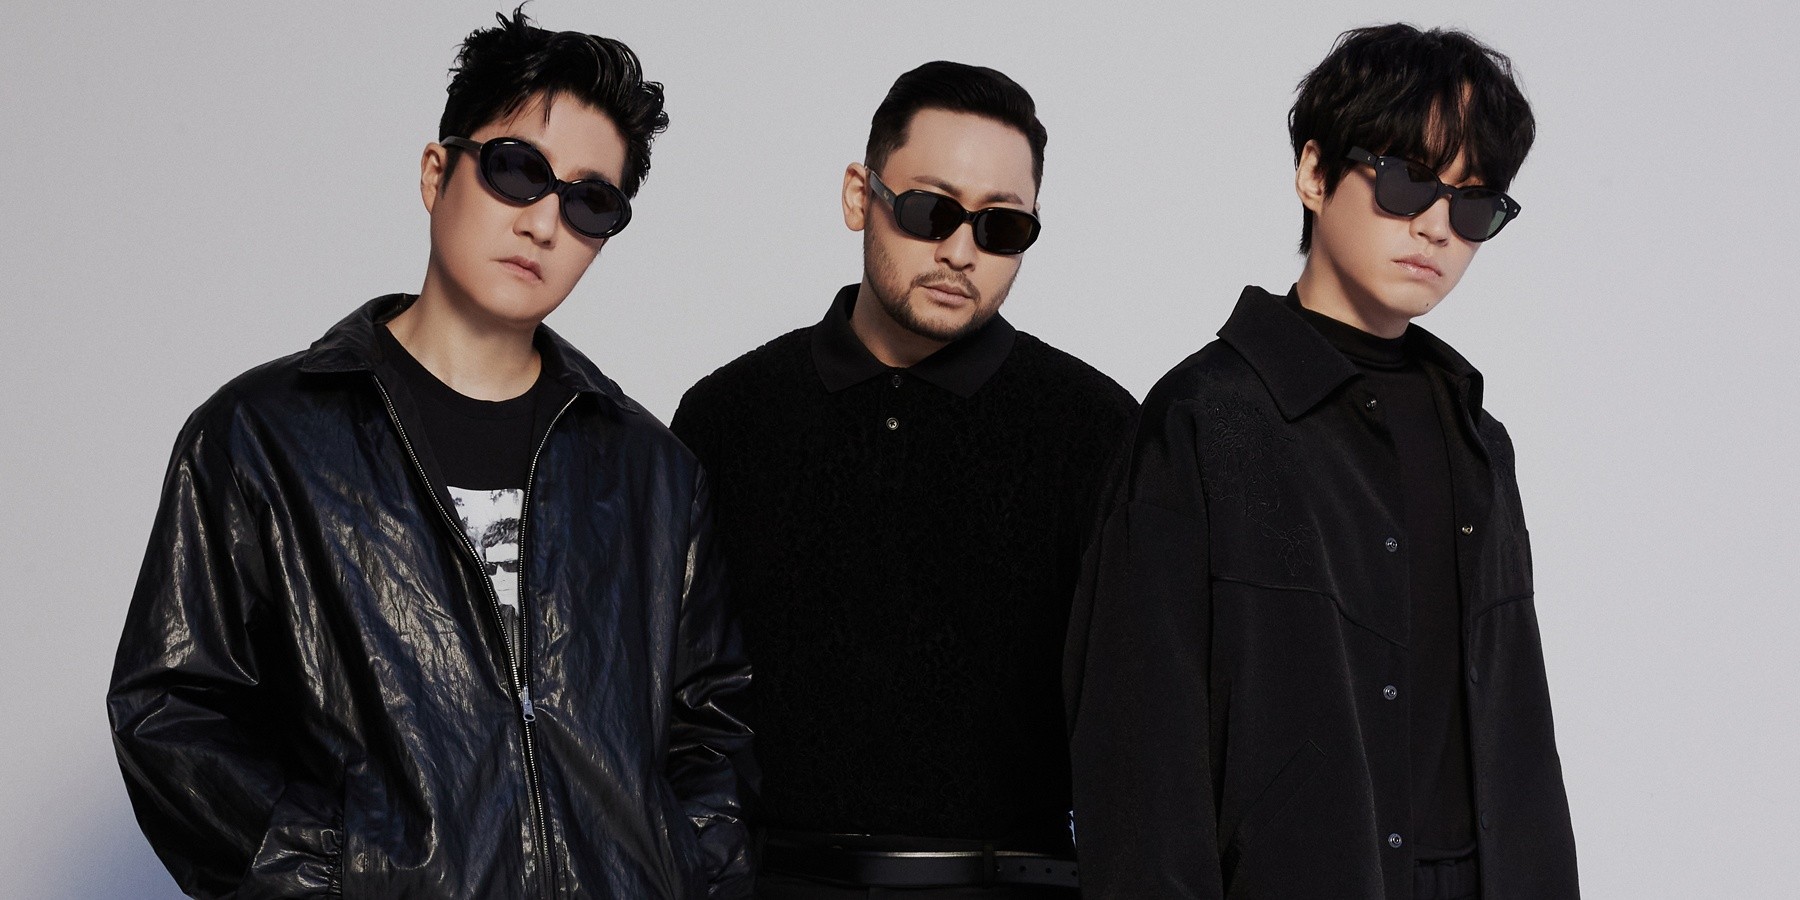 'Epik High Is Here下 (Part 2)' mirrors a reflection of the past, letting it flow to rivers of the future – album review